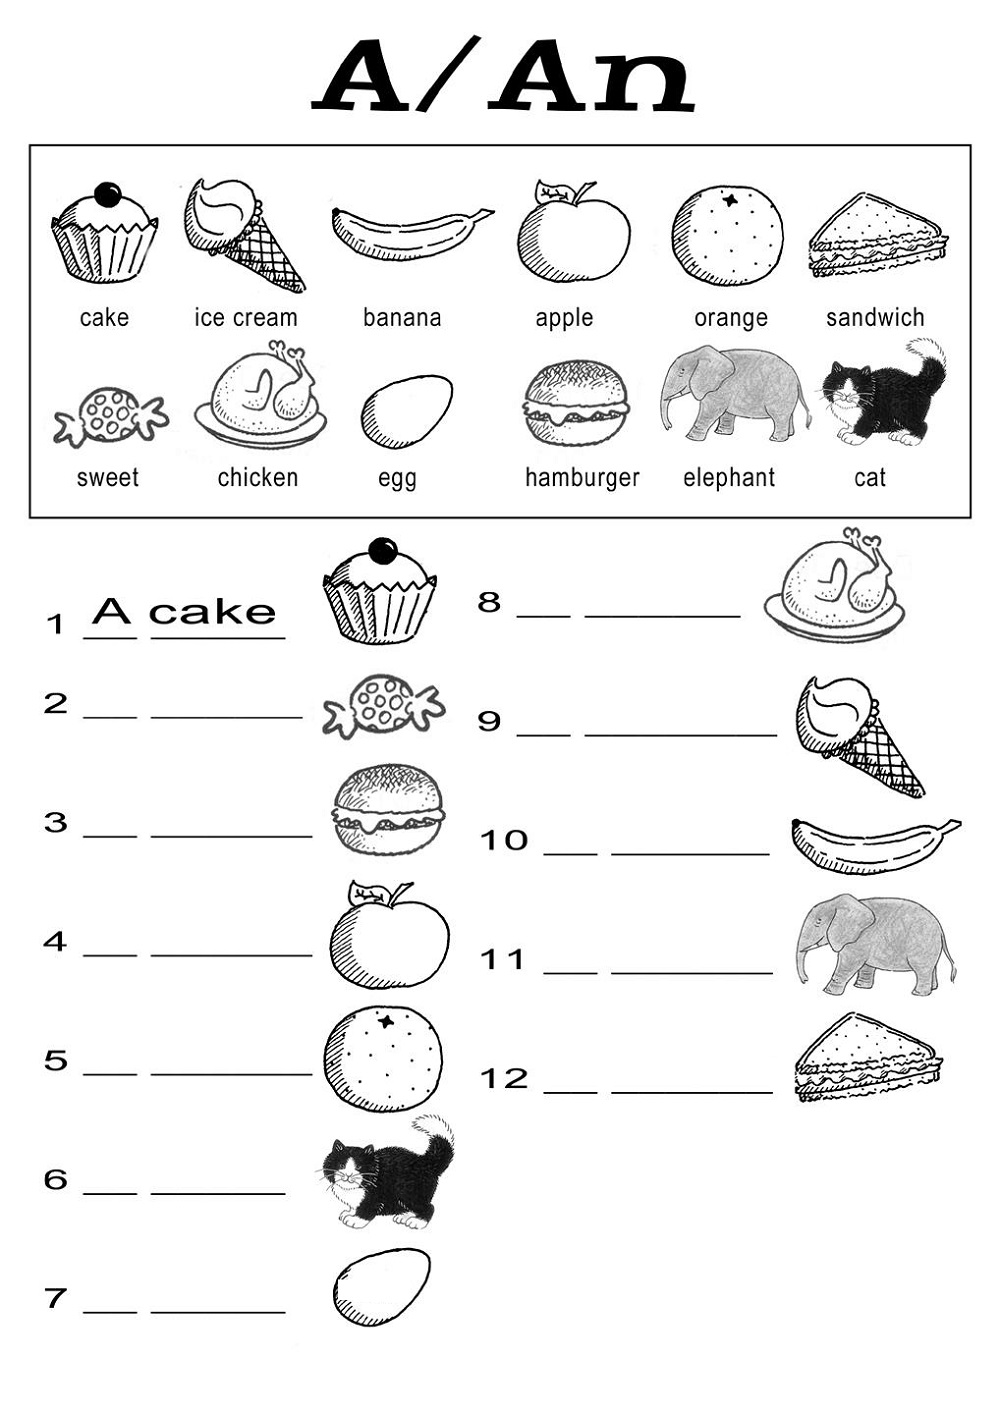 Free Worksheets For Teachers 19 Best Images Of Worksheets For Teachers 